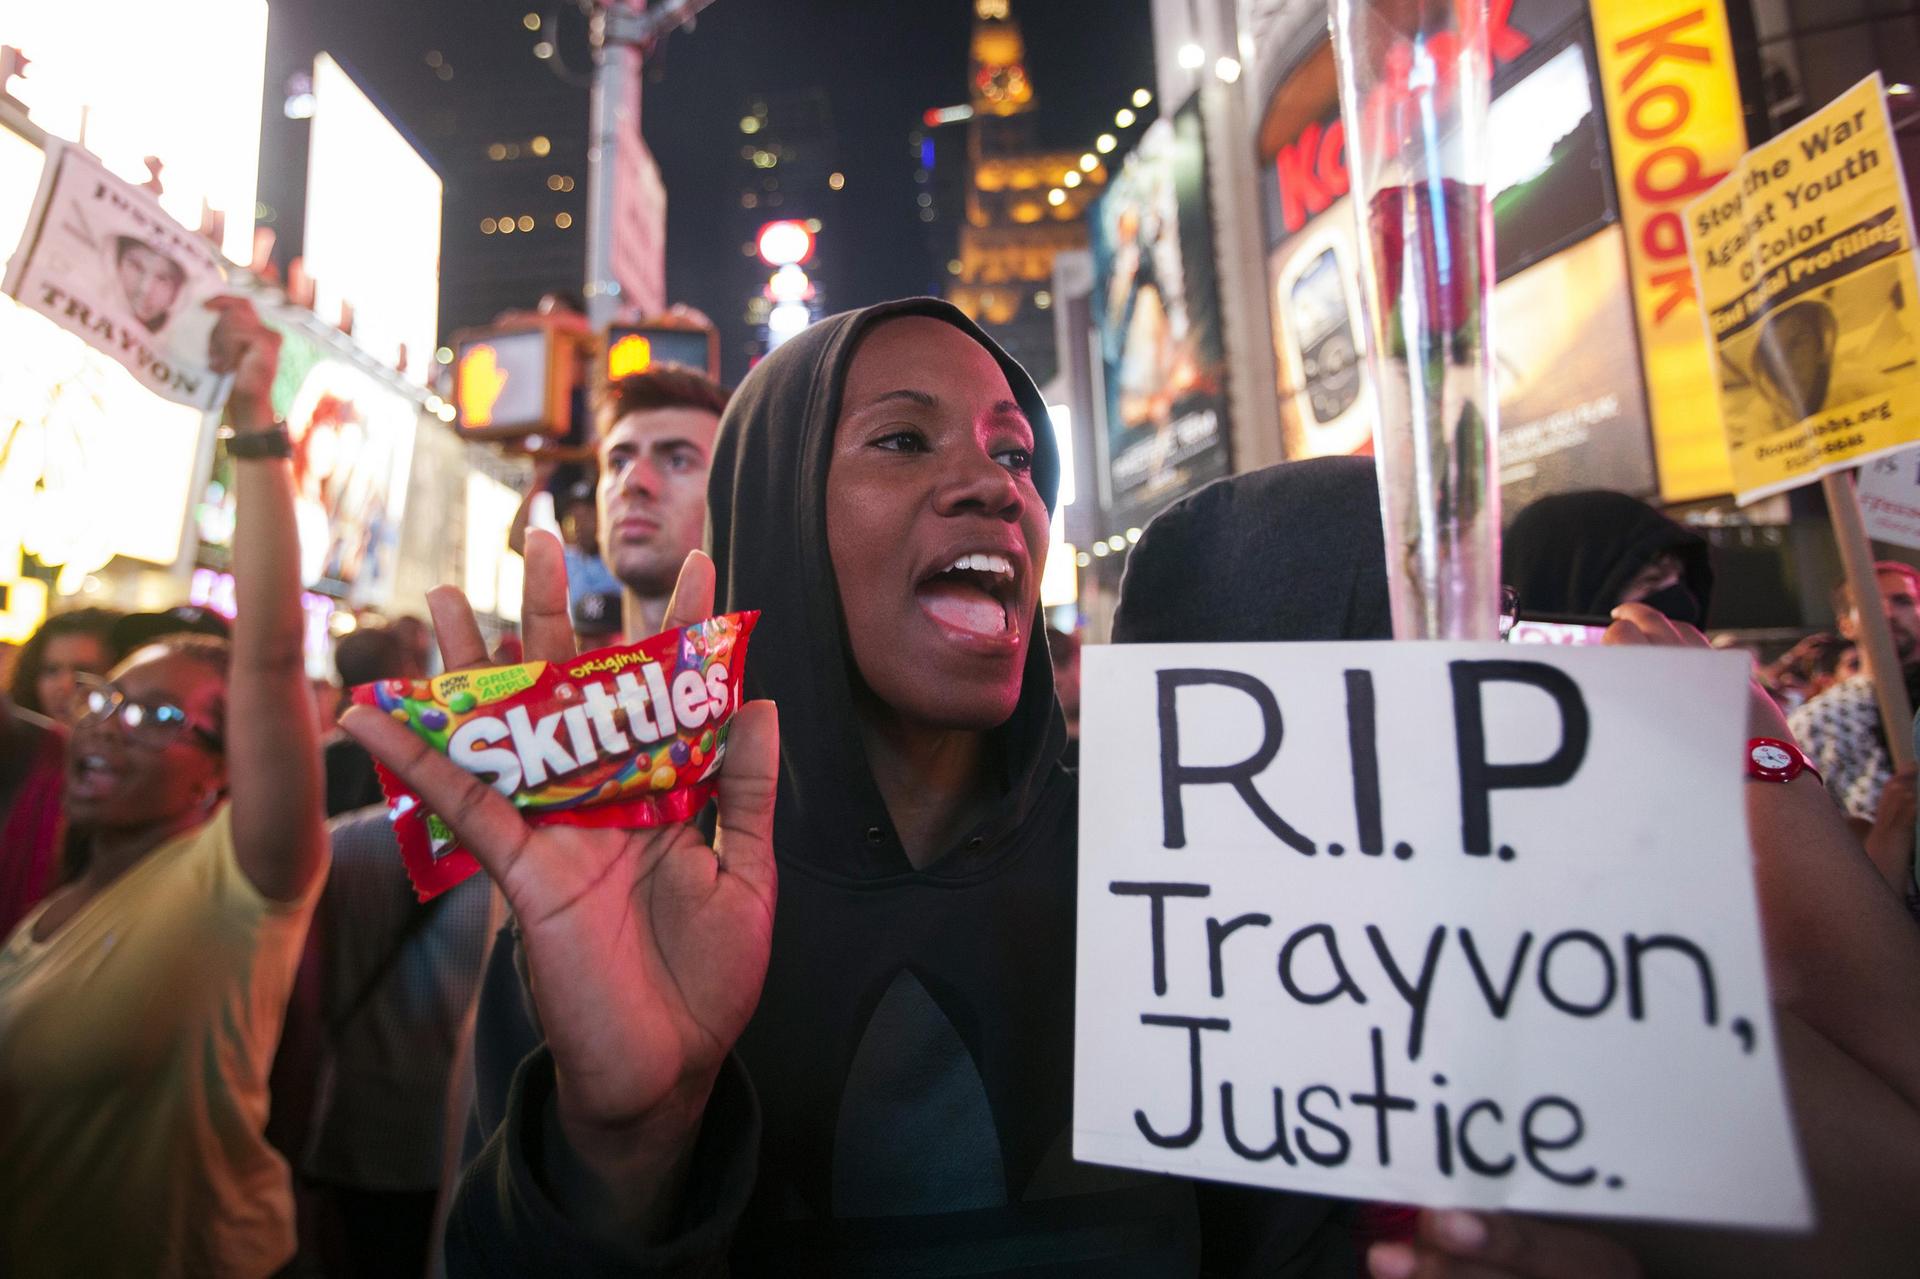 Keisha Martin-Hall holds a bag of Skittles as she protests in New York on Sunday against Zimmerman's acquittal.Photo: Reuters